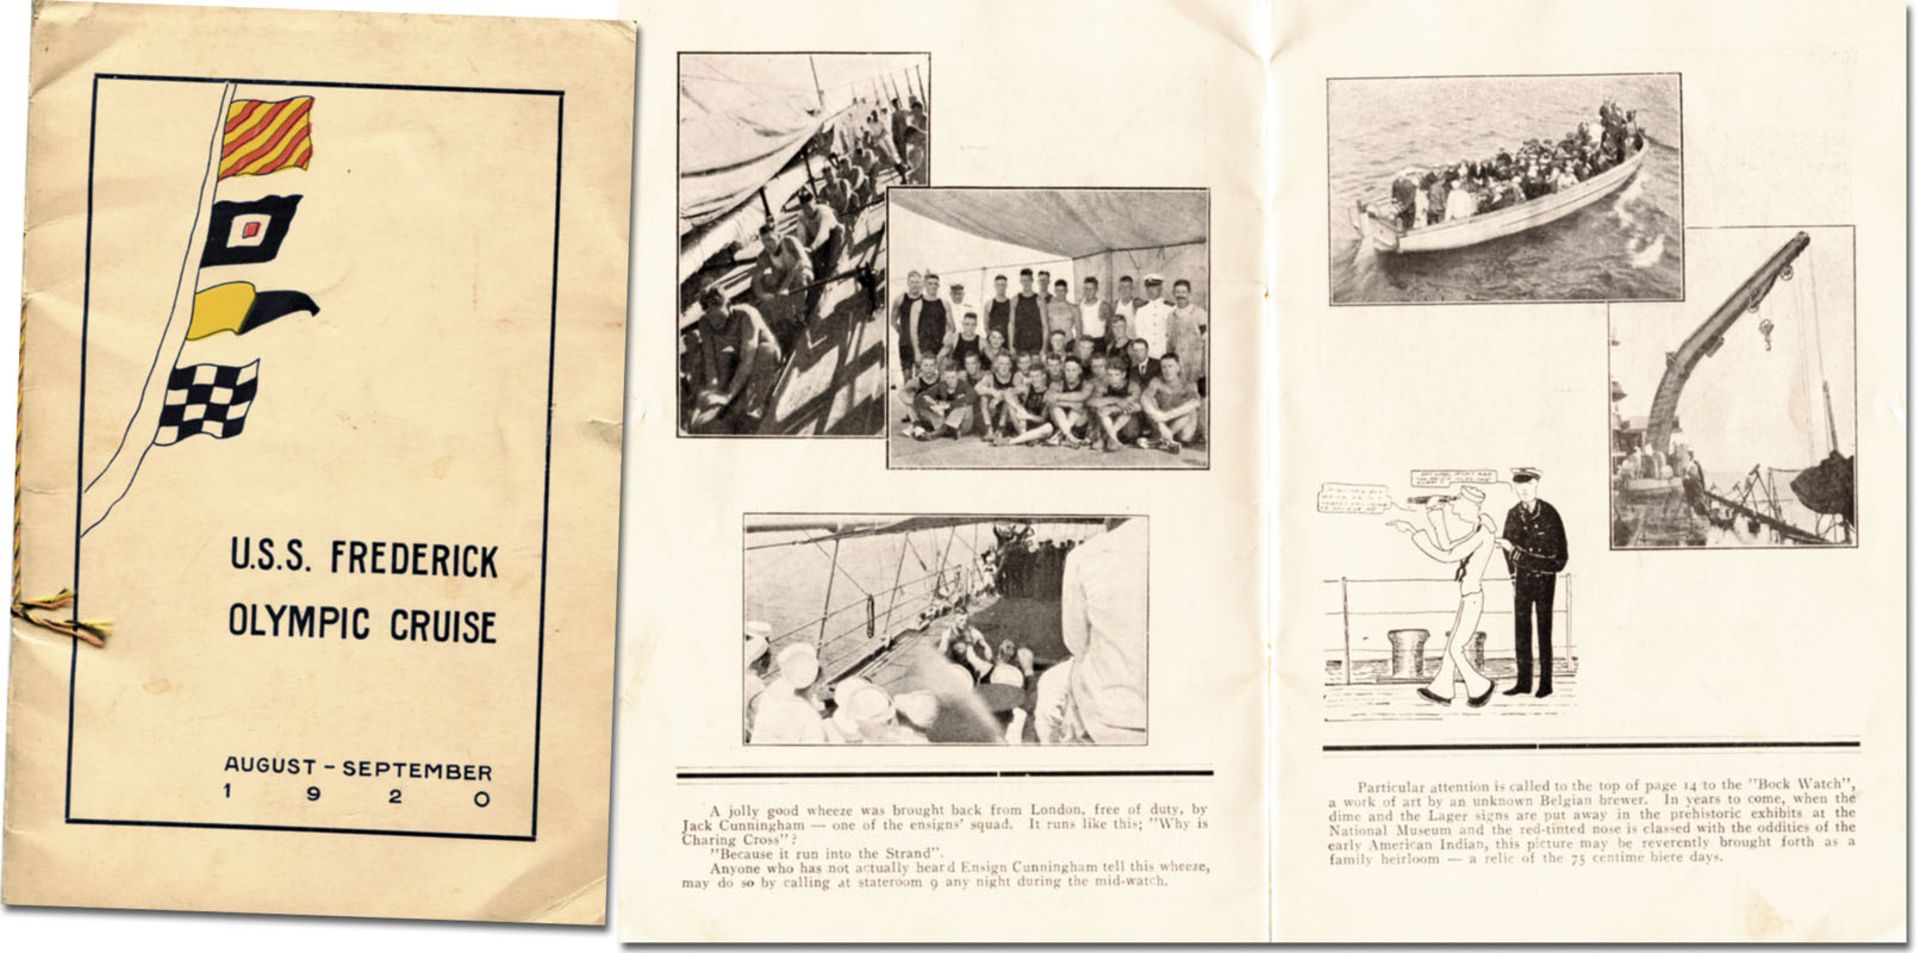 Olympic Games 1920 Report USA Cruise - Booklet U.S.S. Frederick Olympic Cruise August - September 19